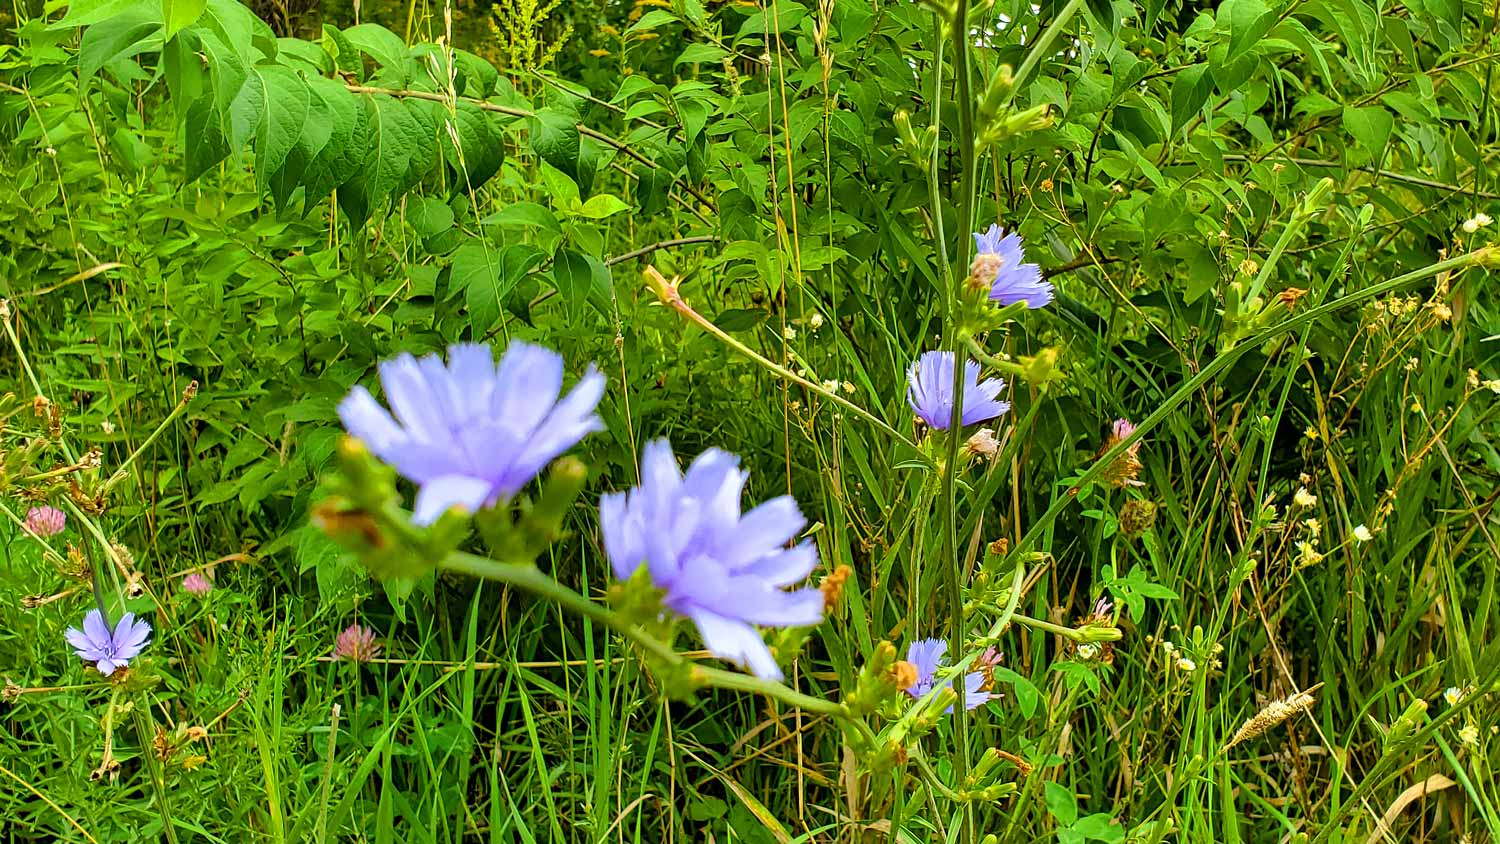 Blue flowers along the trails at the Pleasant Valley Conservation Area.